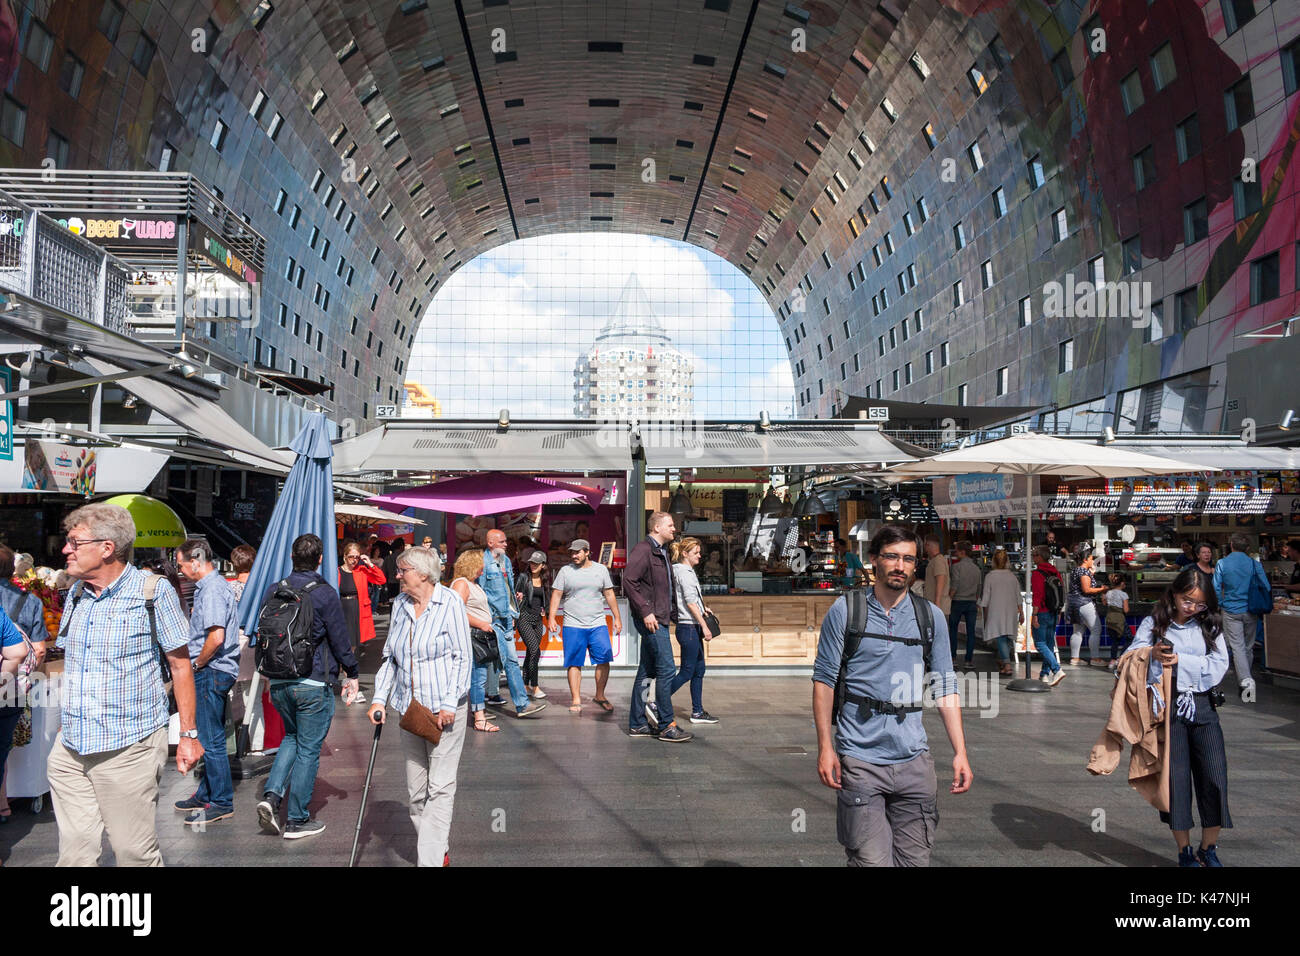 A view of the interior of the food hall at Markthal, Rotterdam, Netherlands Stock Photo